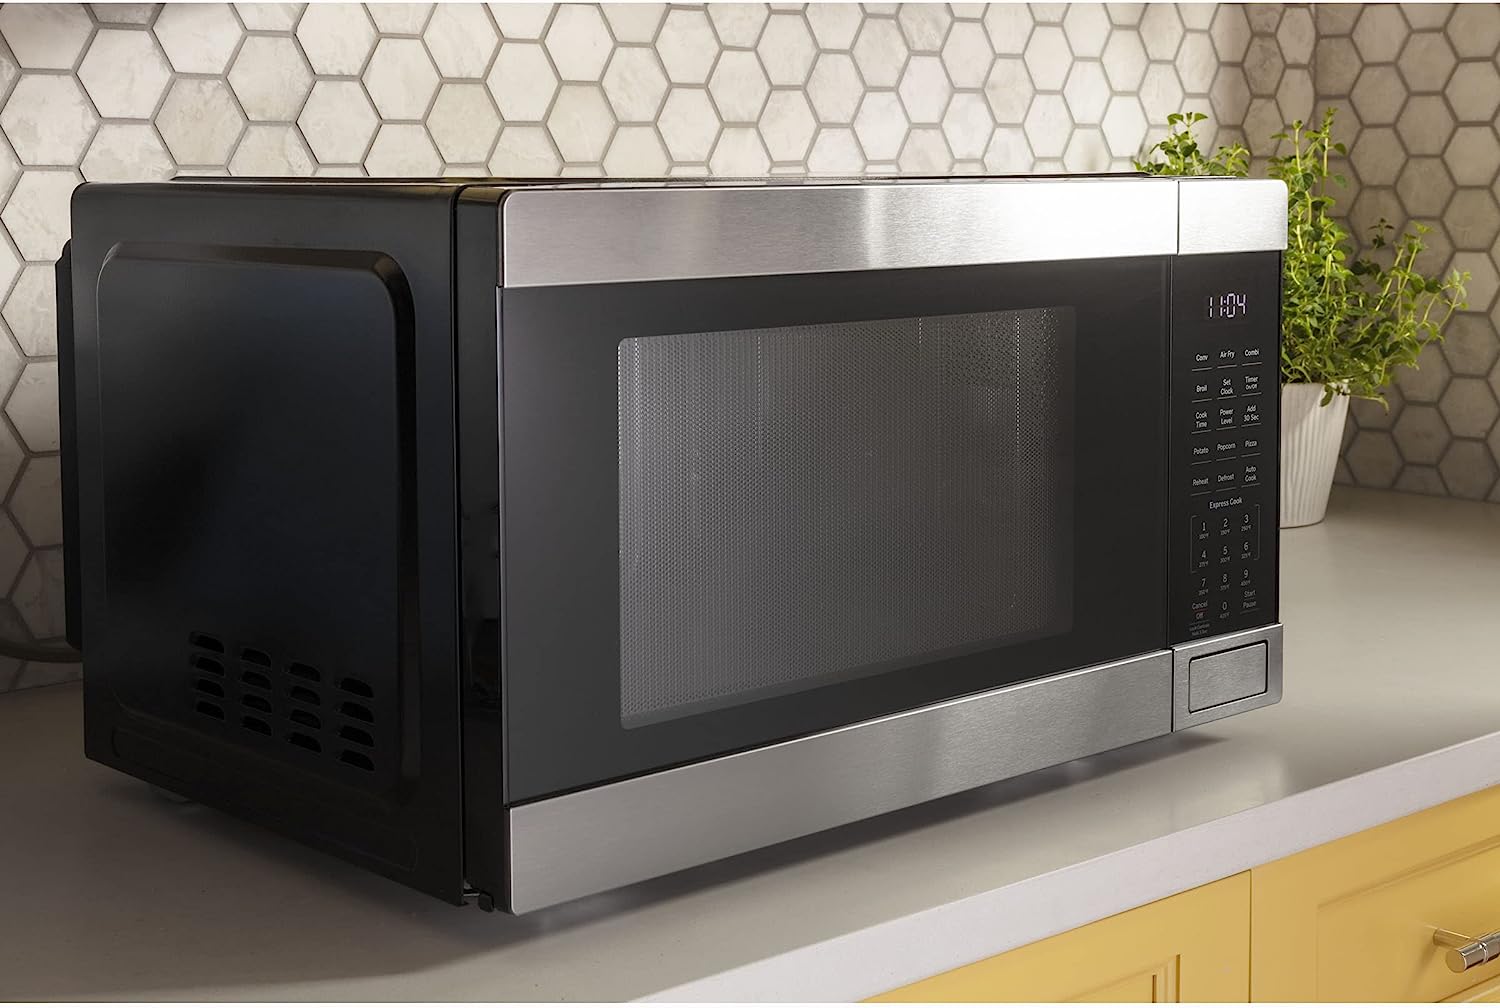 https://bigbigmart.com/wp-content/uploads/2023/07/GE-3-in-1-Countertop-Microwave-Oven-Complete-With-Air-Fryer-Broiler-Convection-Mode-1.0-Cubic-Feet-Capacity-1050-Watts-Kitchen-Essentials-for-the-Countertop-or-Dorm-Room-Stainless-Steel15.jpg